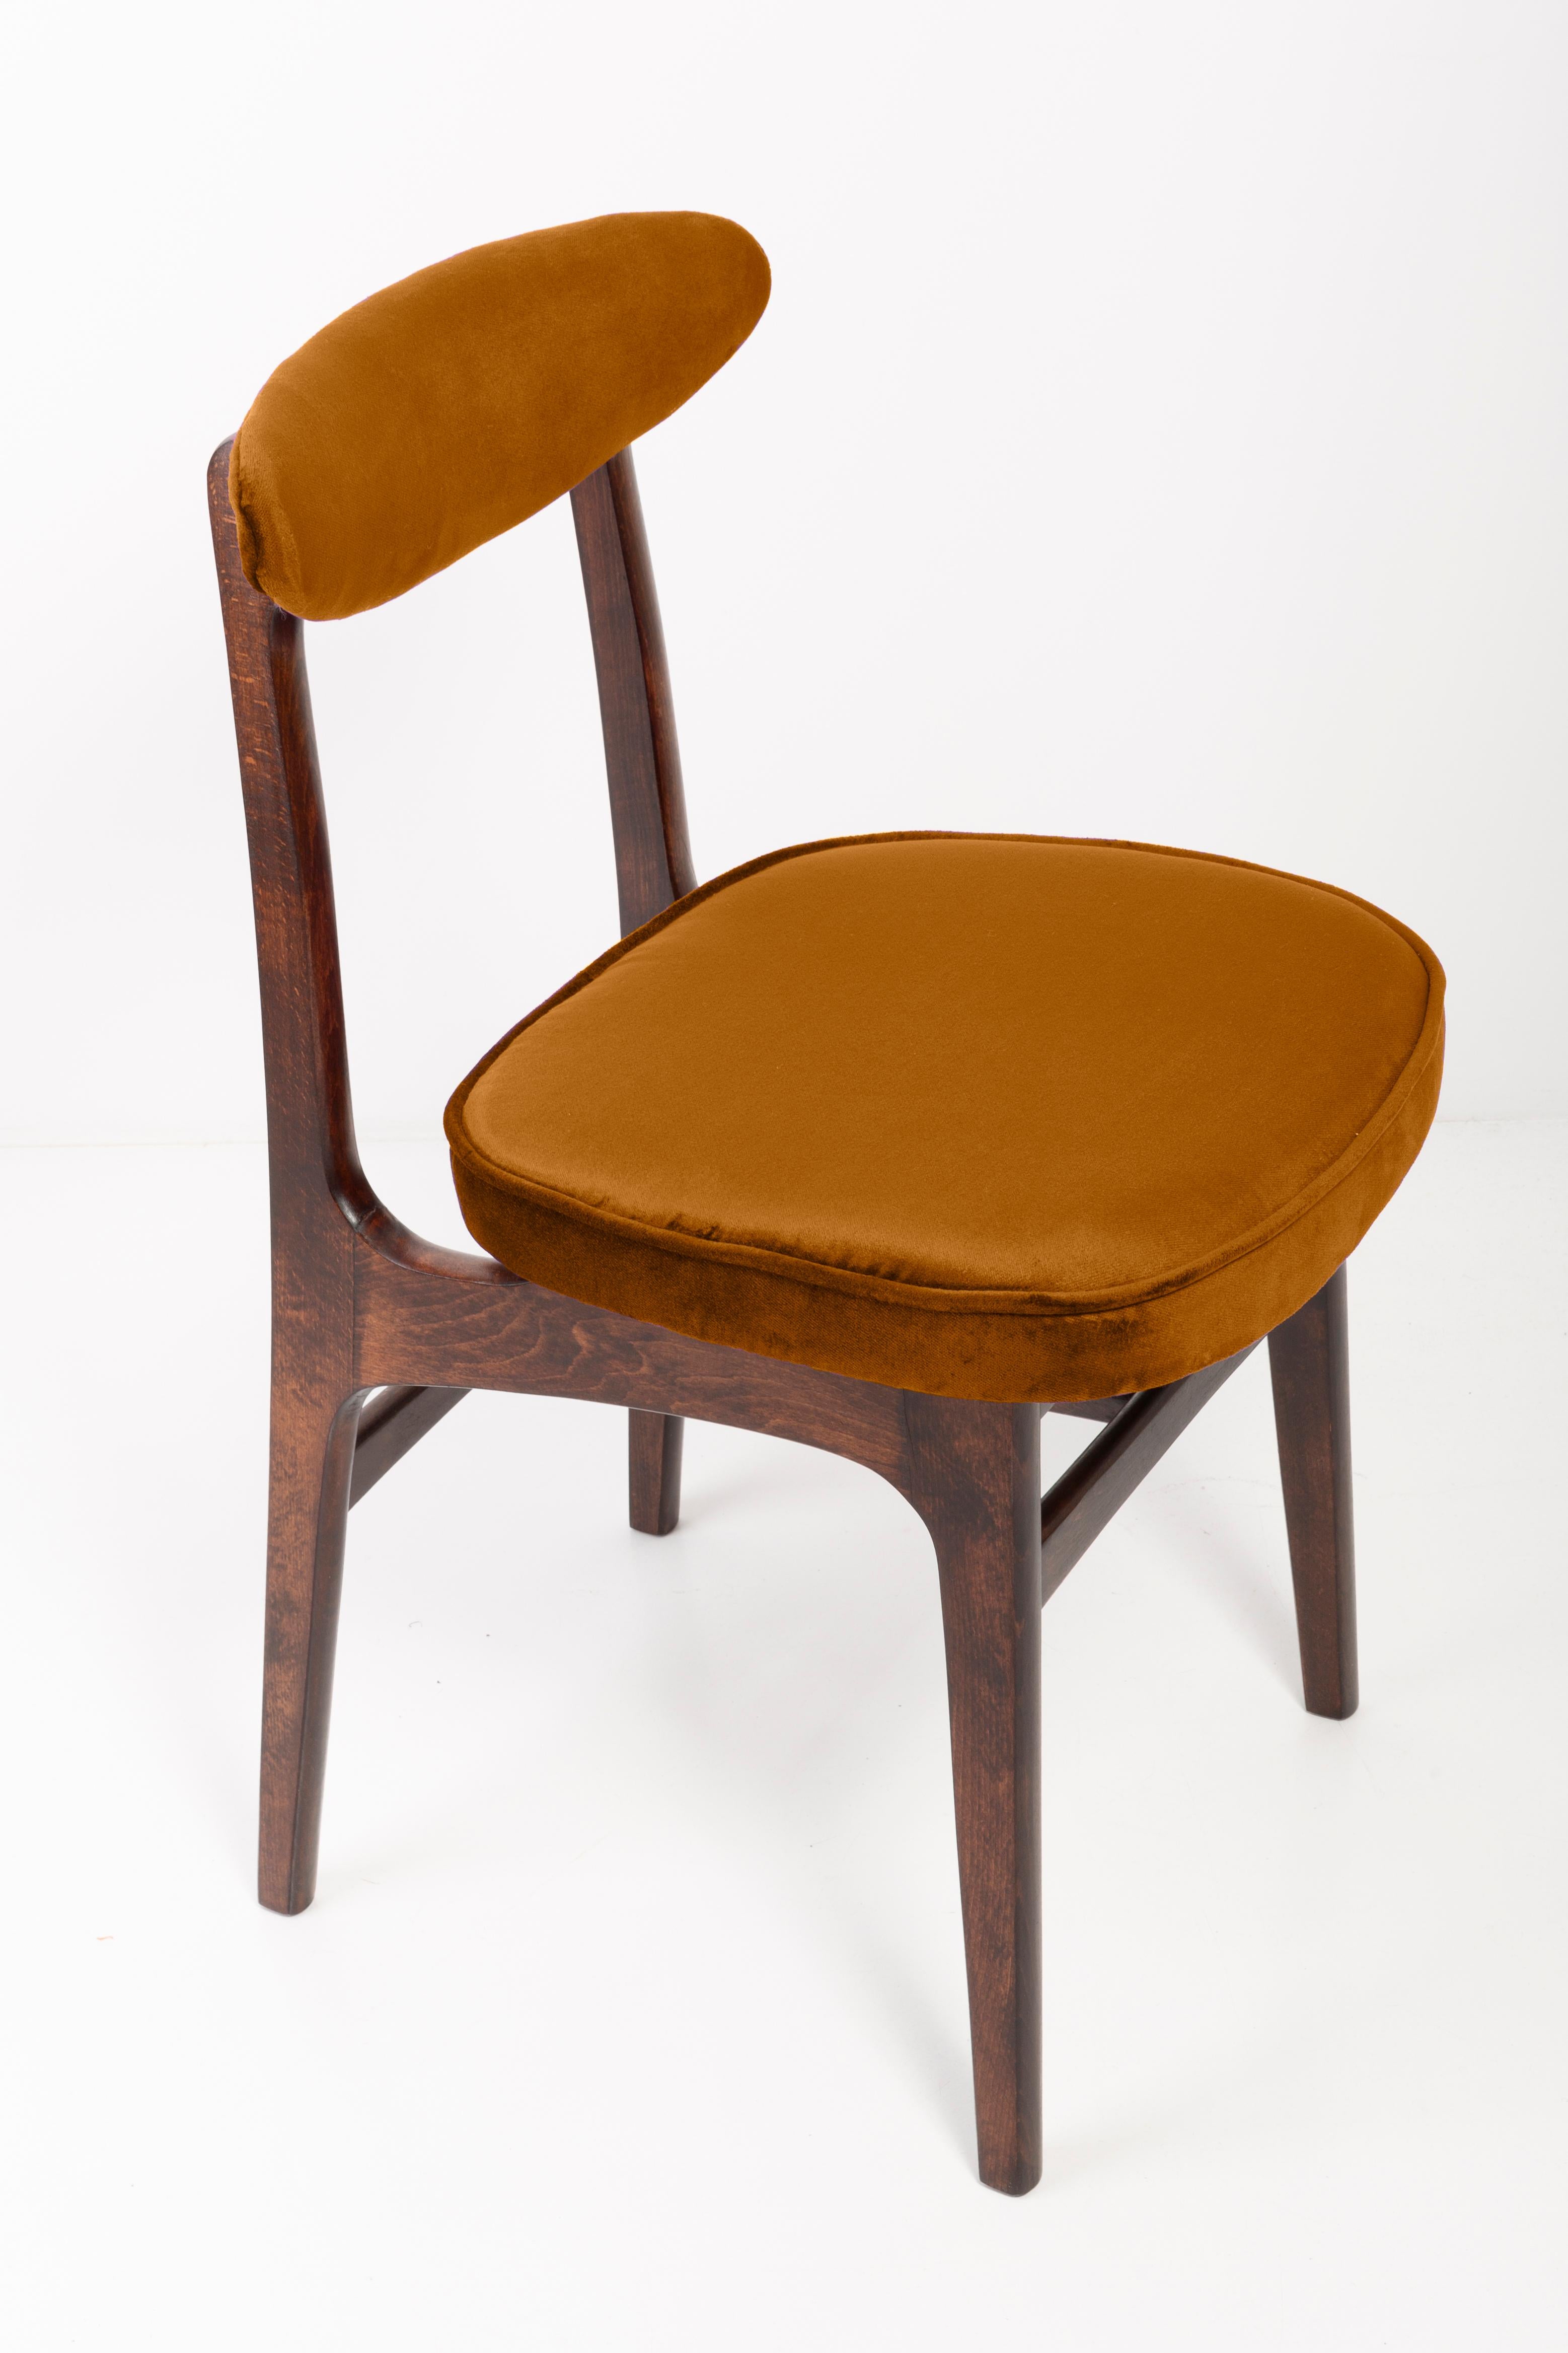 Four chairs designed by Prof. Rajmund Halas. It has been made of beechwood. Chairs are after undergone a complete upholstery renovation, the woodwork has been refreshed. Seats and backs were dressed in a copper (color 960), durable and pleasant to